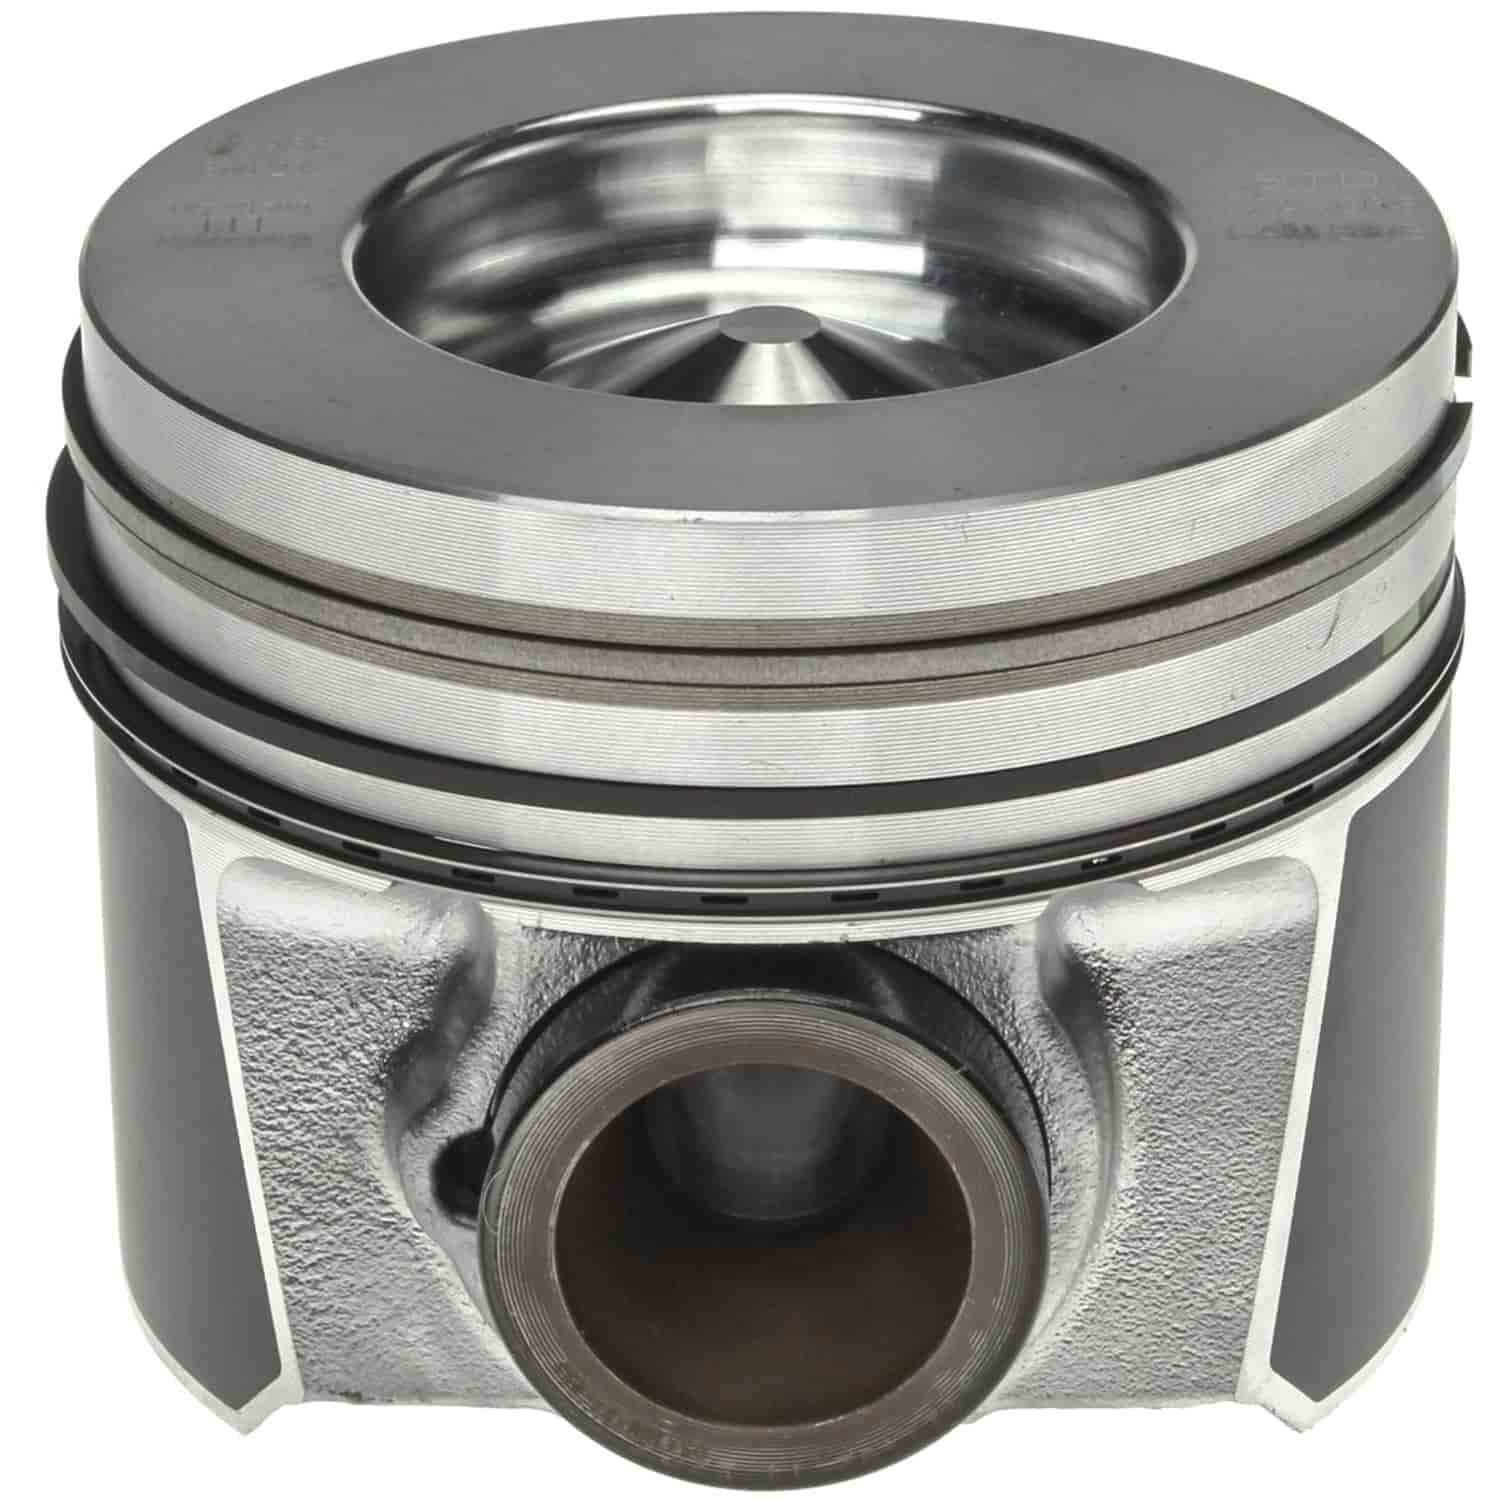 Piston and Rings Set 2008-2010 Ford/Navistar Powerstroke Diesel V8 6.4L with 3.896"/98.75mm Bore (+.75mm)